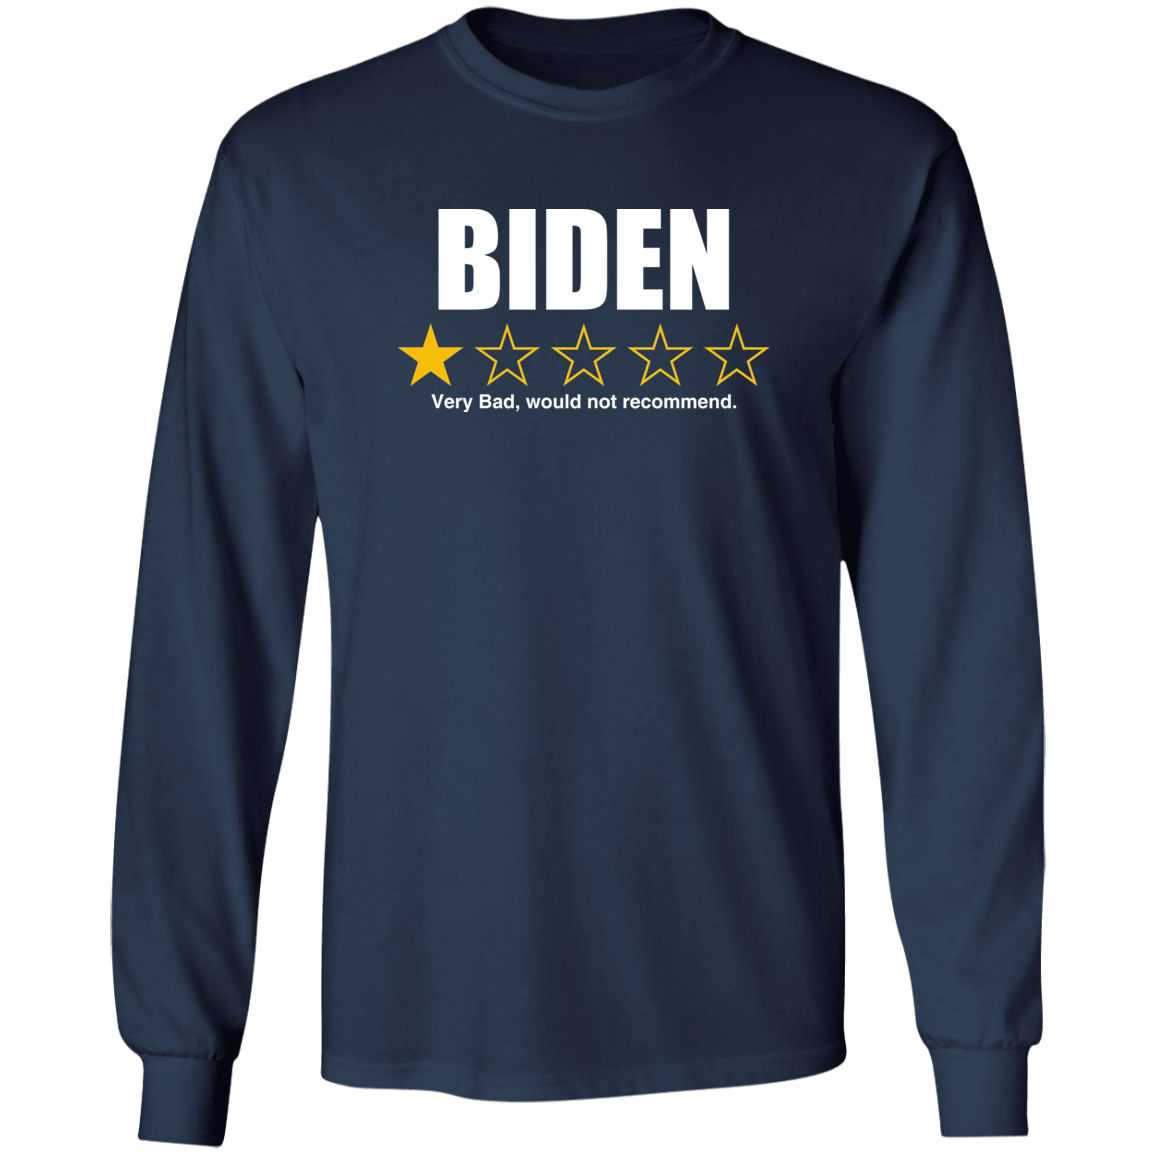 BIDEN - 1 Star Rating, Very Bad Not Recommended